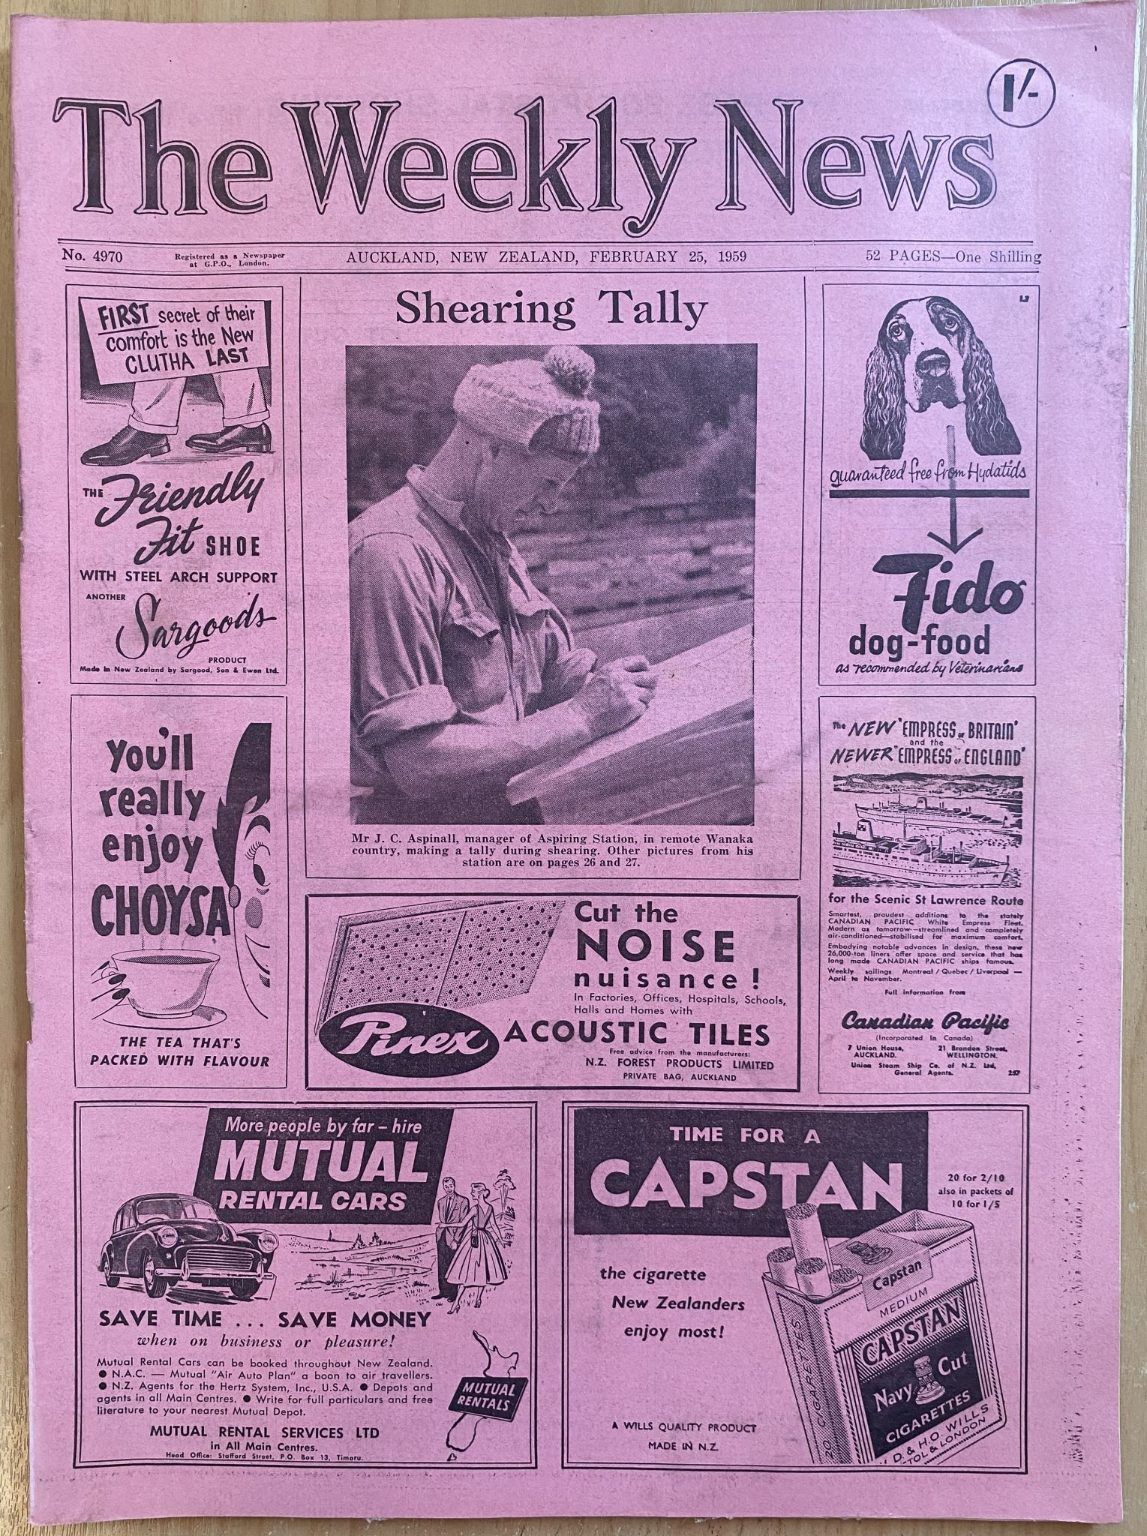 OLD NEWSPAPER: The Weekly News - No. 4970, 25 February 1959